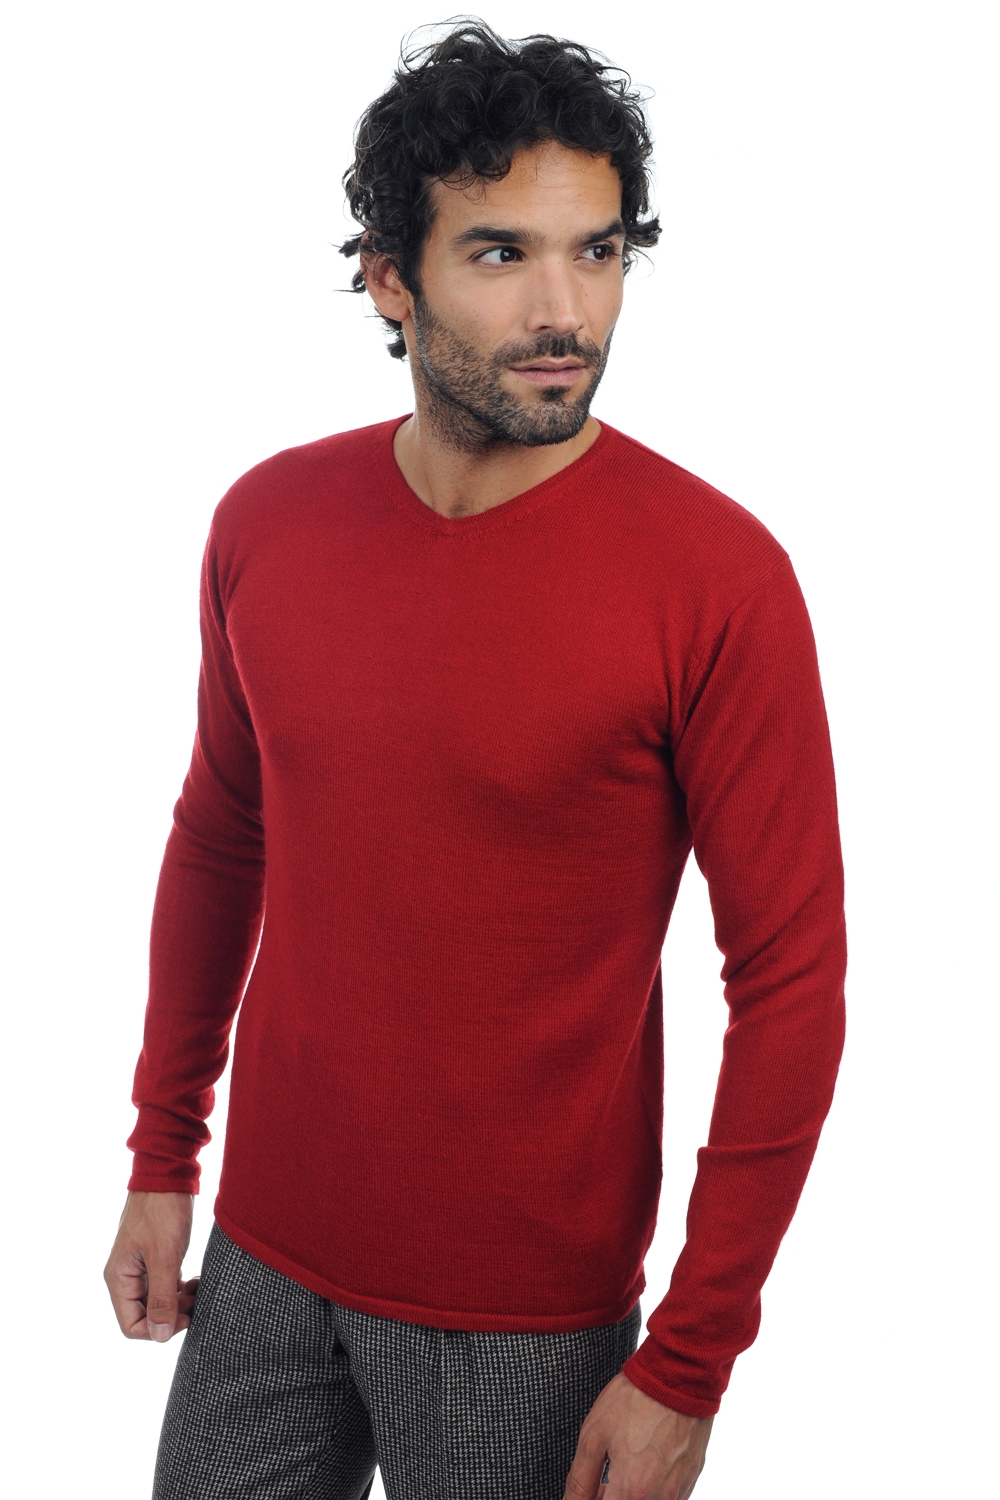 Baby Alpaga pull homme ethan rouge l